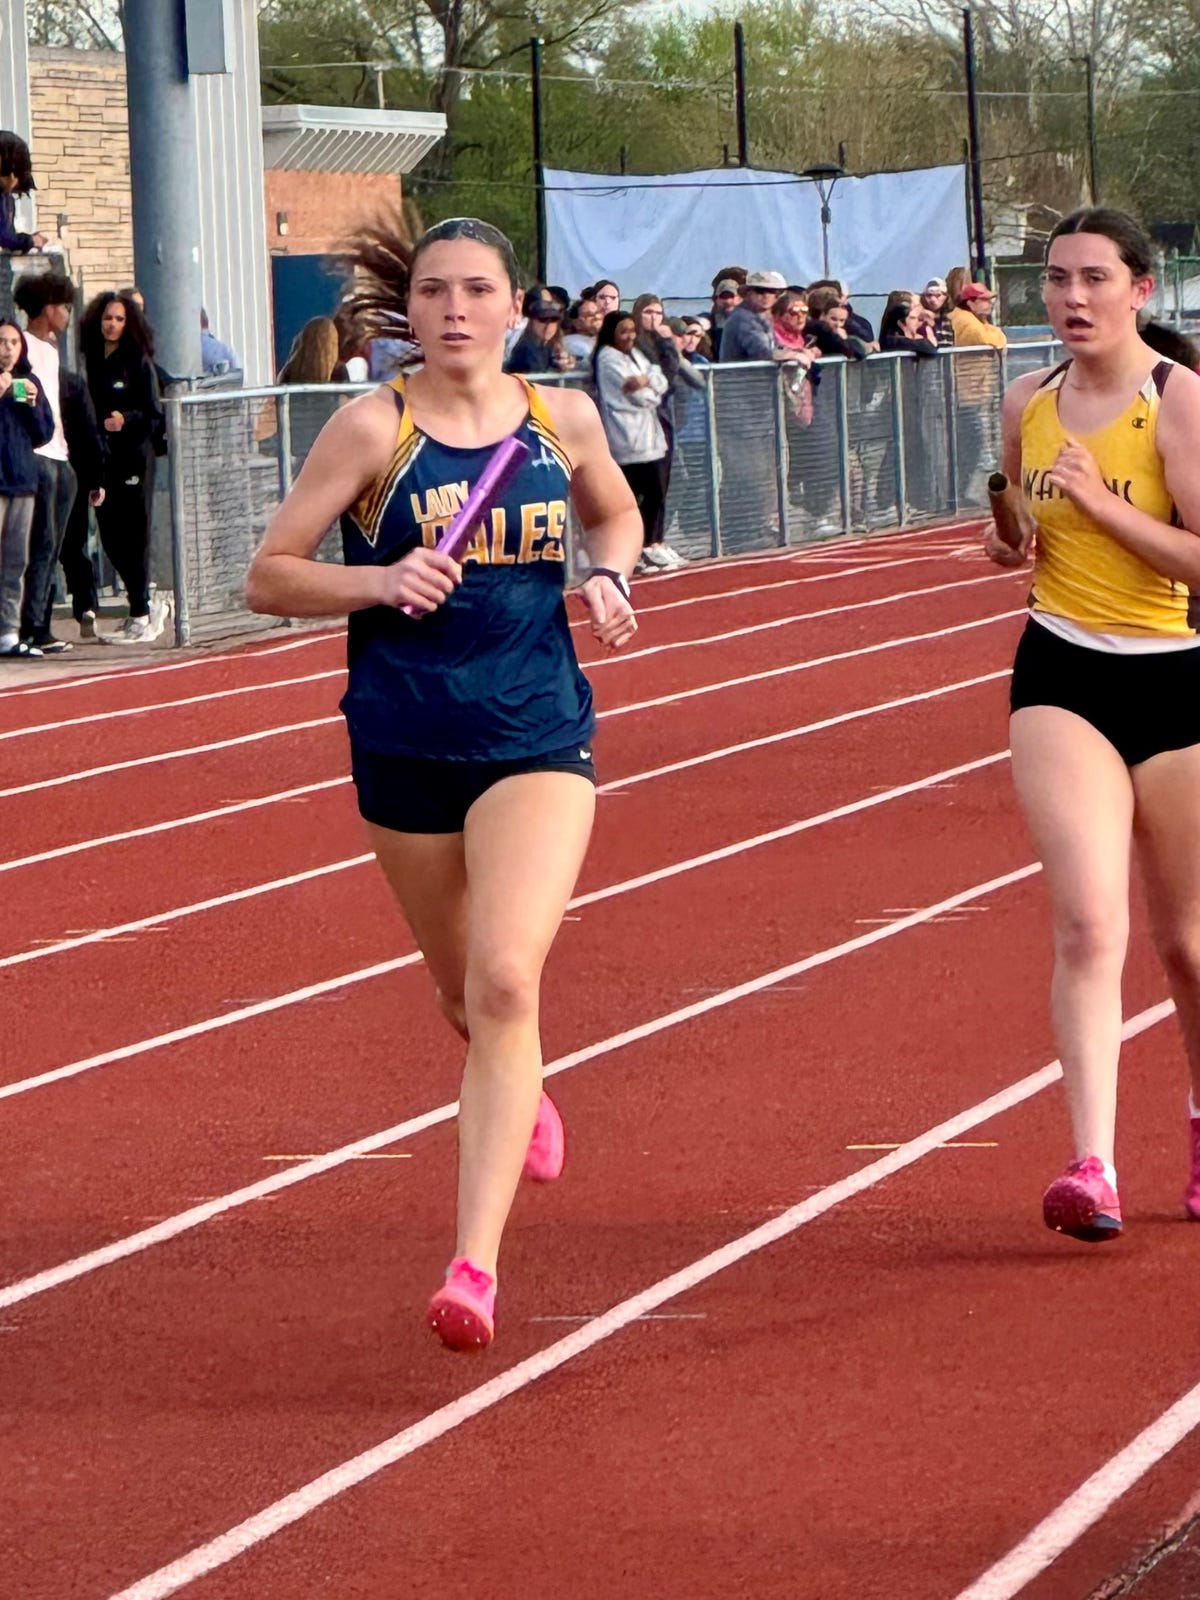 Lady Gales Dominate at 57th Fulton Relays: Record-Breaking Victories and Team Success